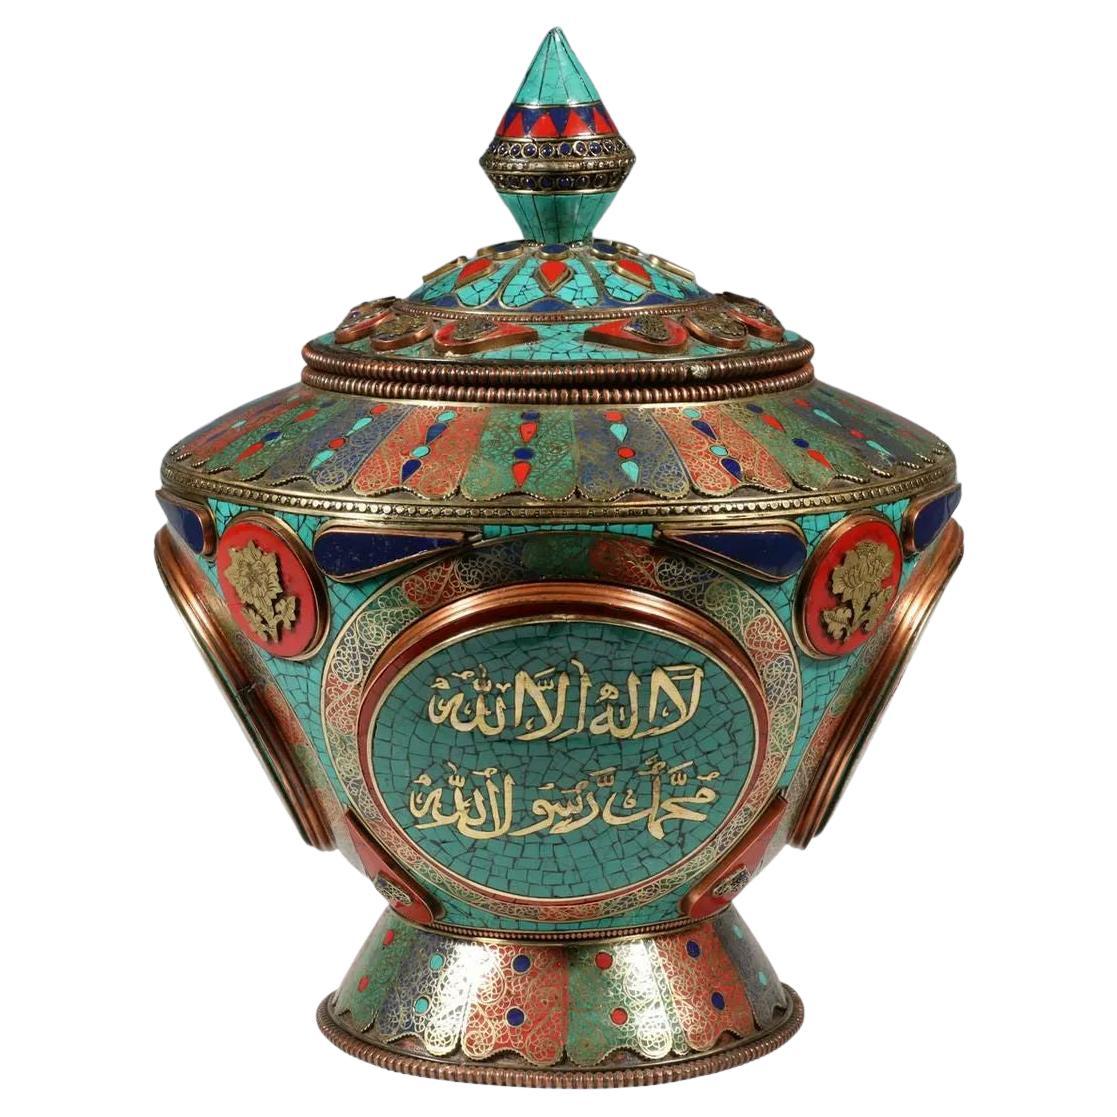 Our very unusual and large enameled metal jar or bowl with lid dates from the early twentieth century and features inlaid turquoise, lapis and carnelian stones, four cartouches with Islamic poetic calligraphy, and red, green and blue enamel in the